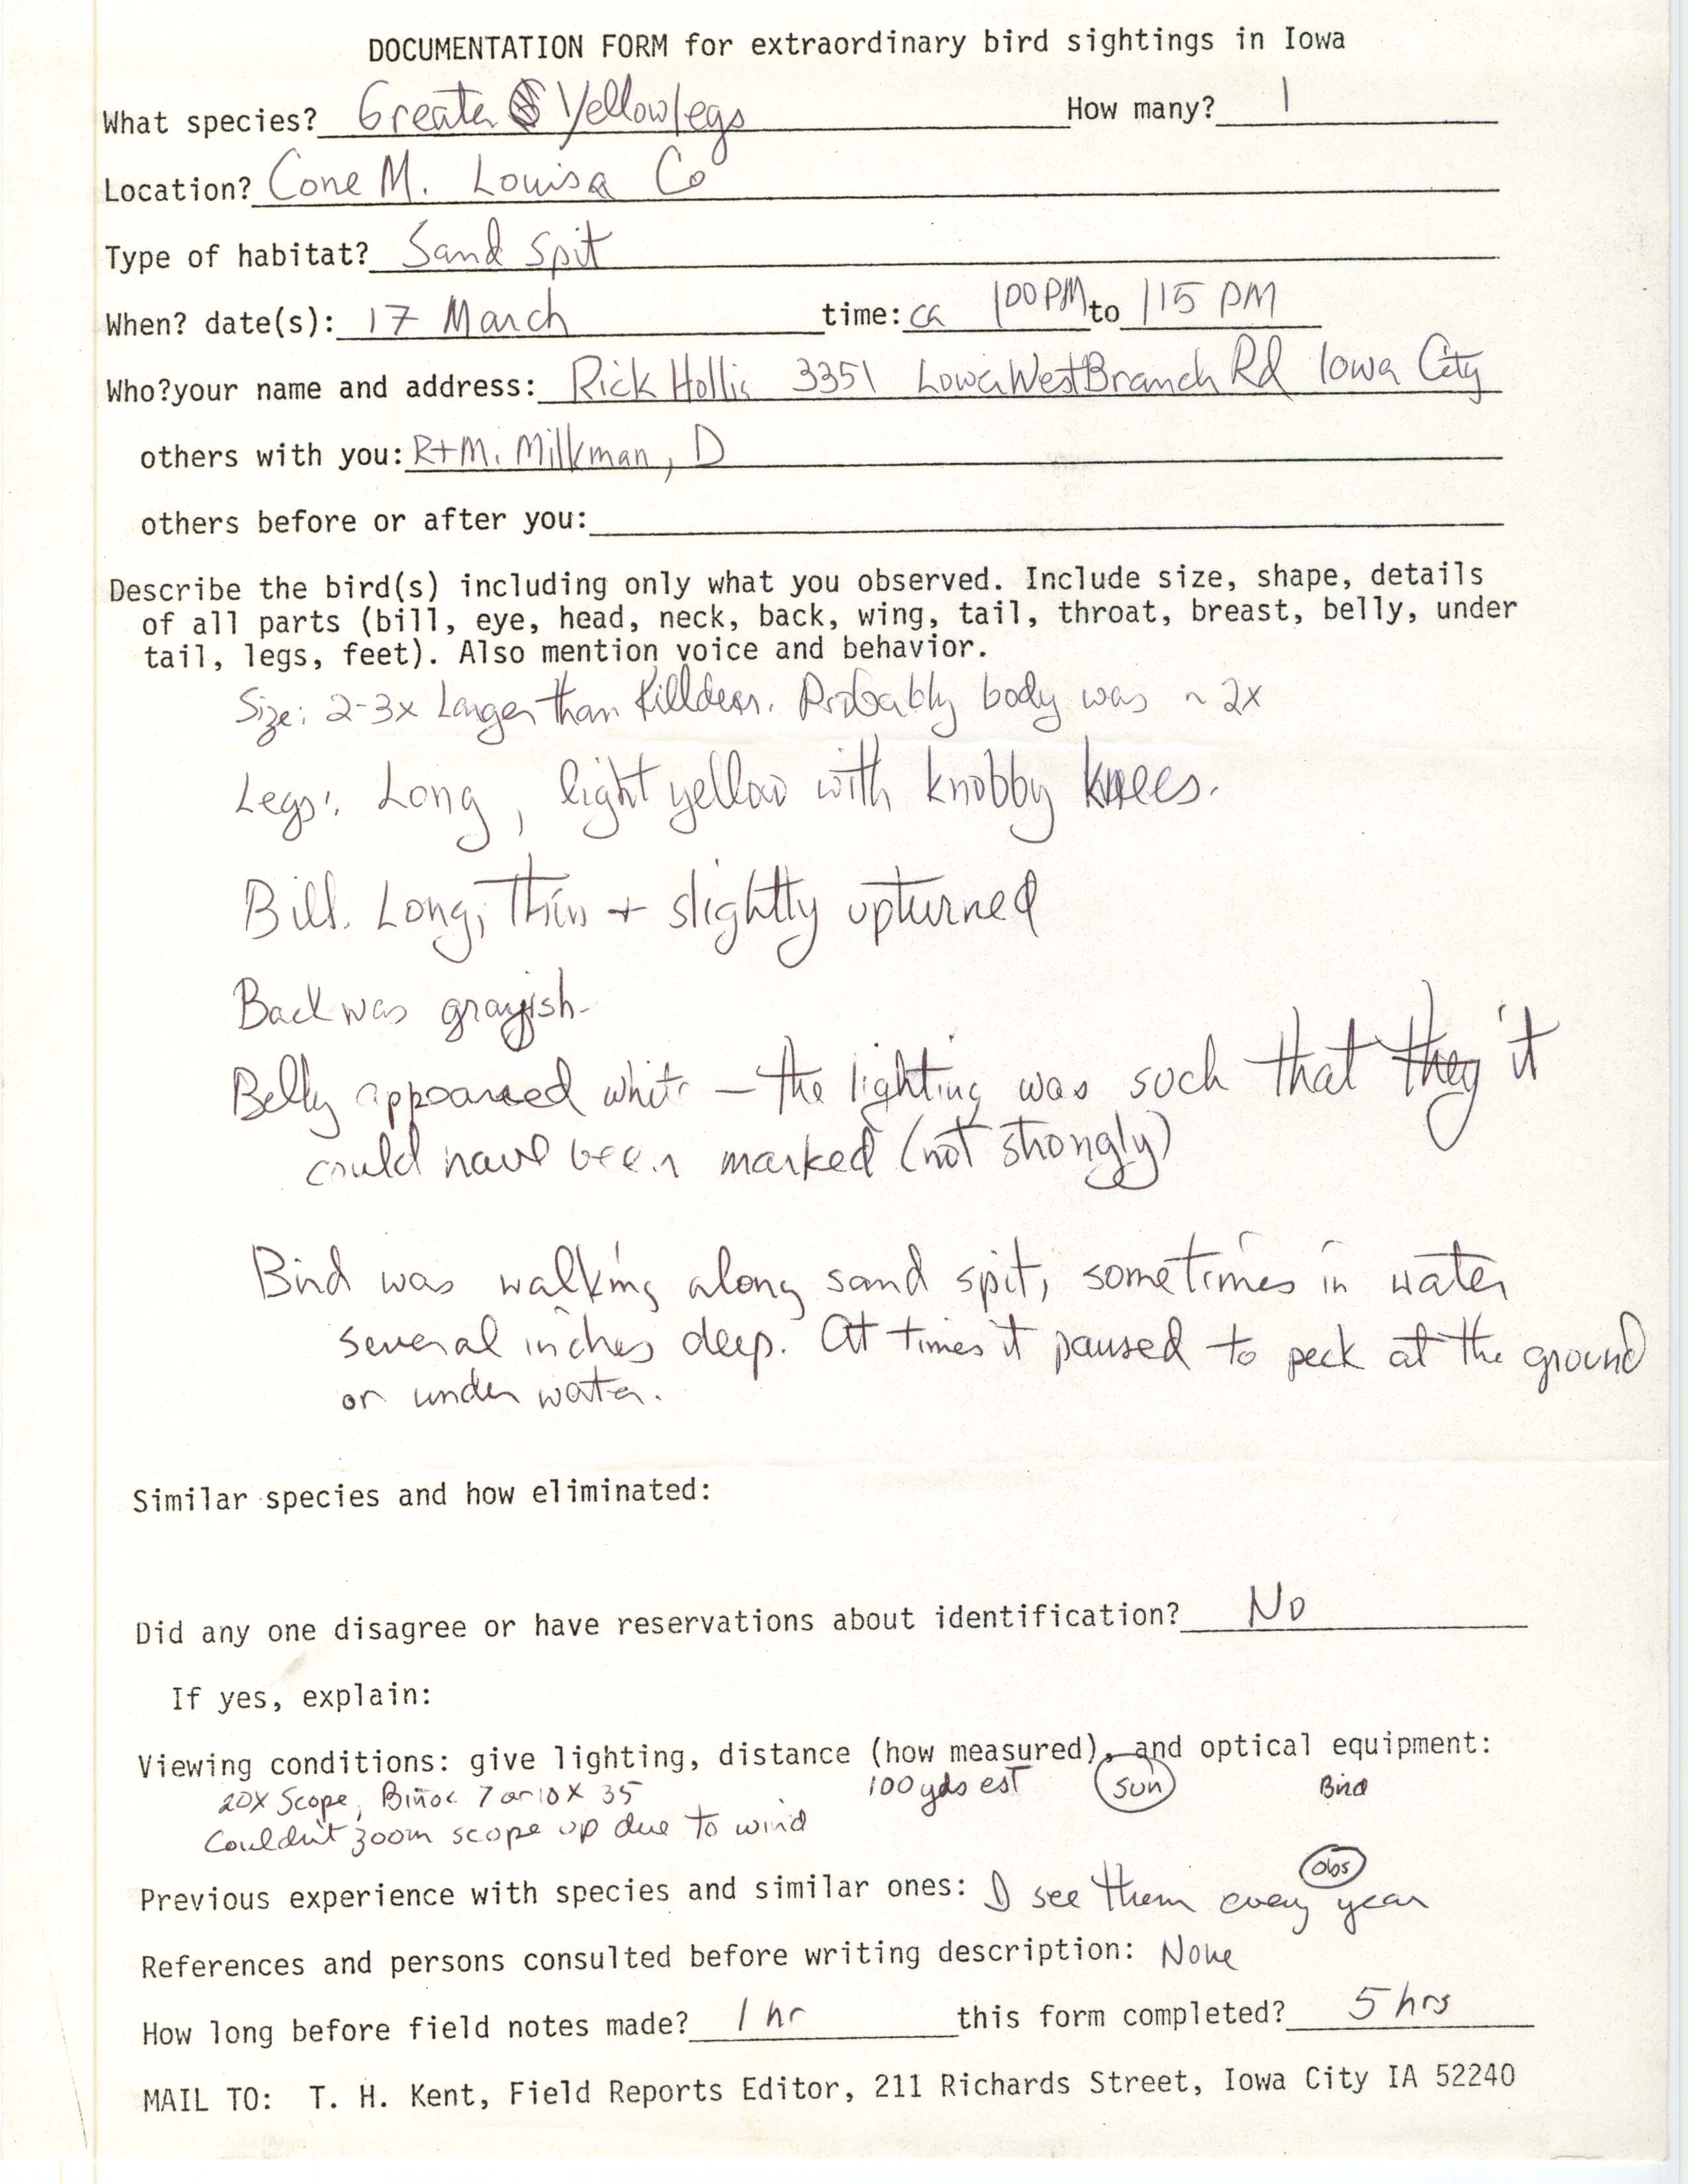 Rare bird documentation form for Greater Yellowlegs at Cone Marsh, unknown year 